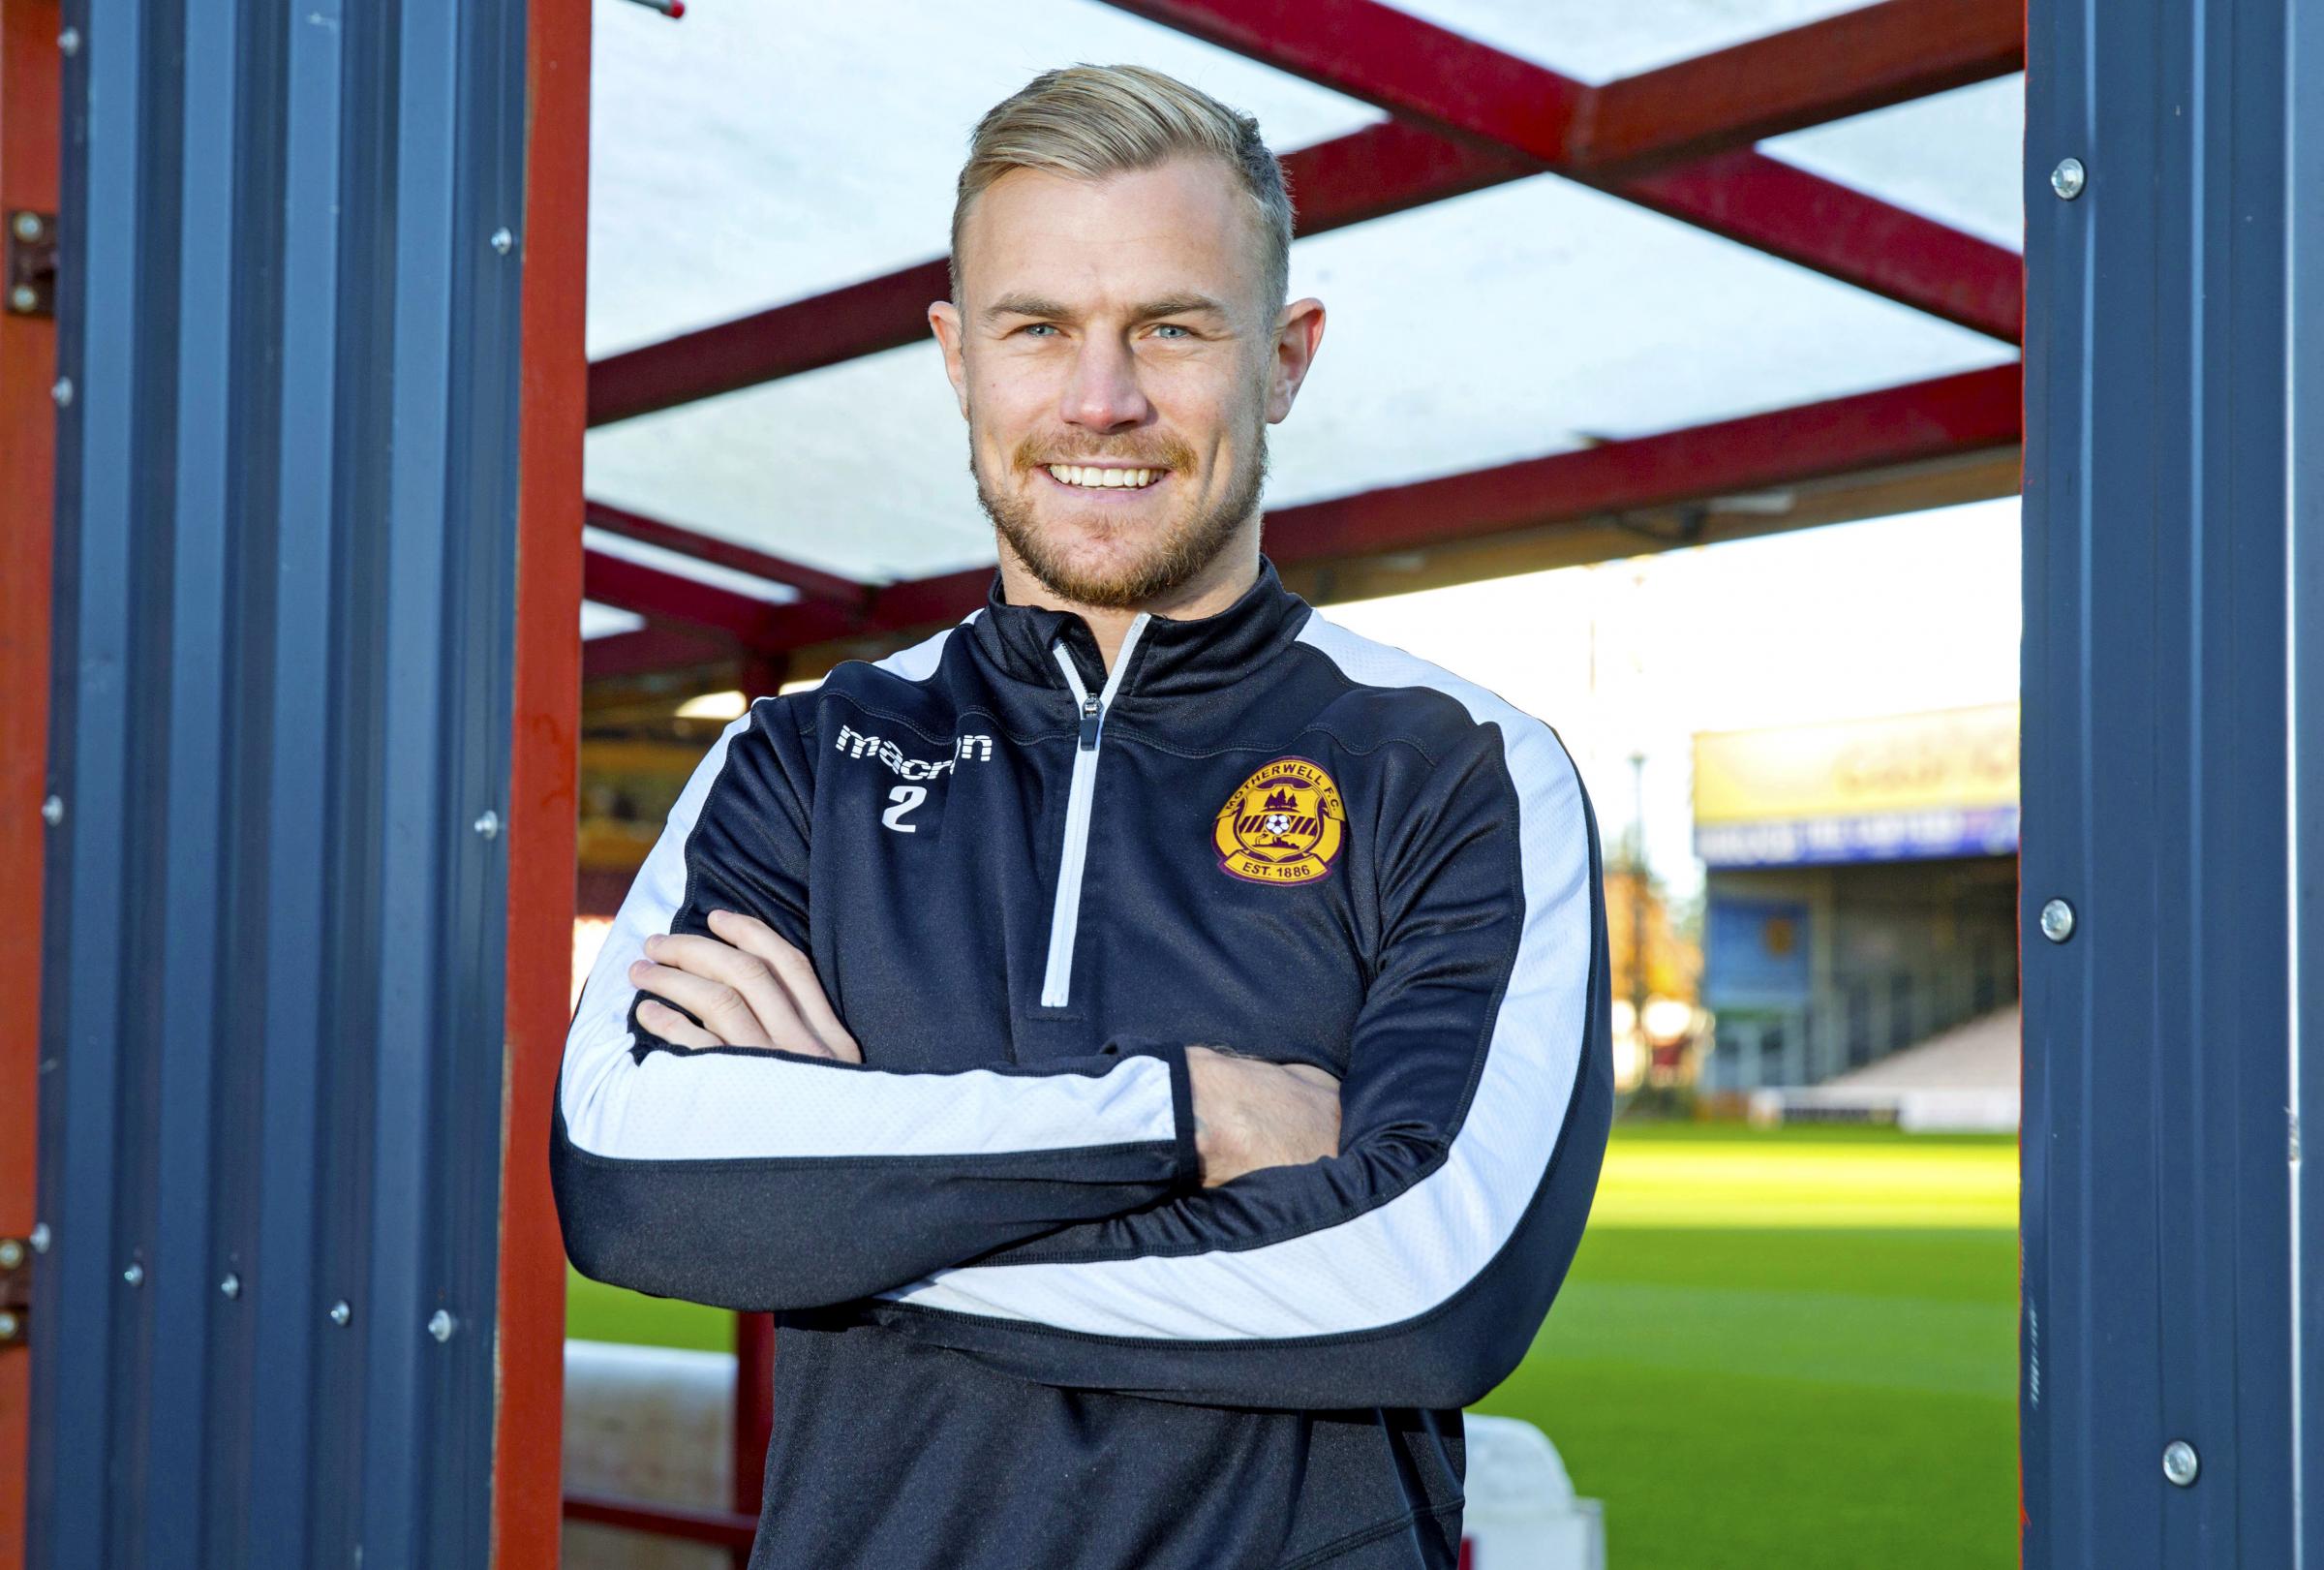 Motherwell's Richard Tait: How I gave up rugby as a Kelso kid to follow football dream - Herald Scotland